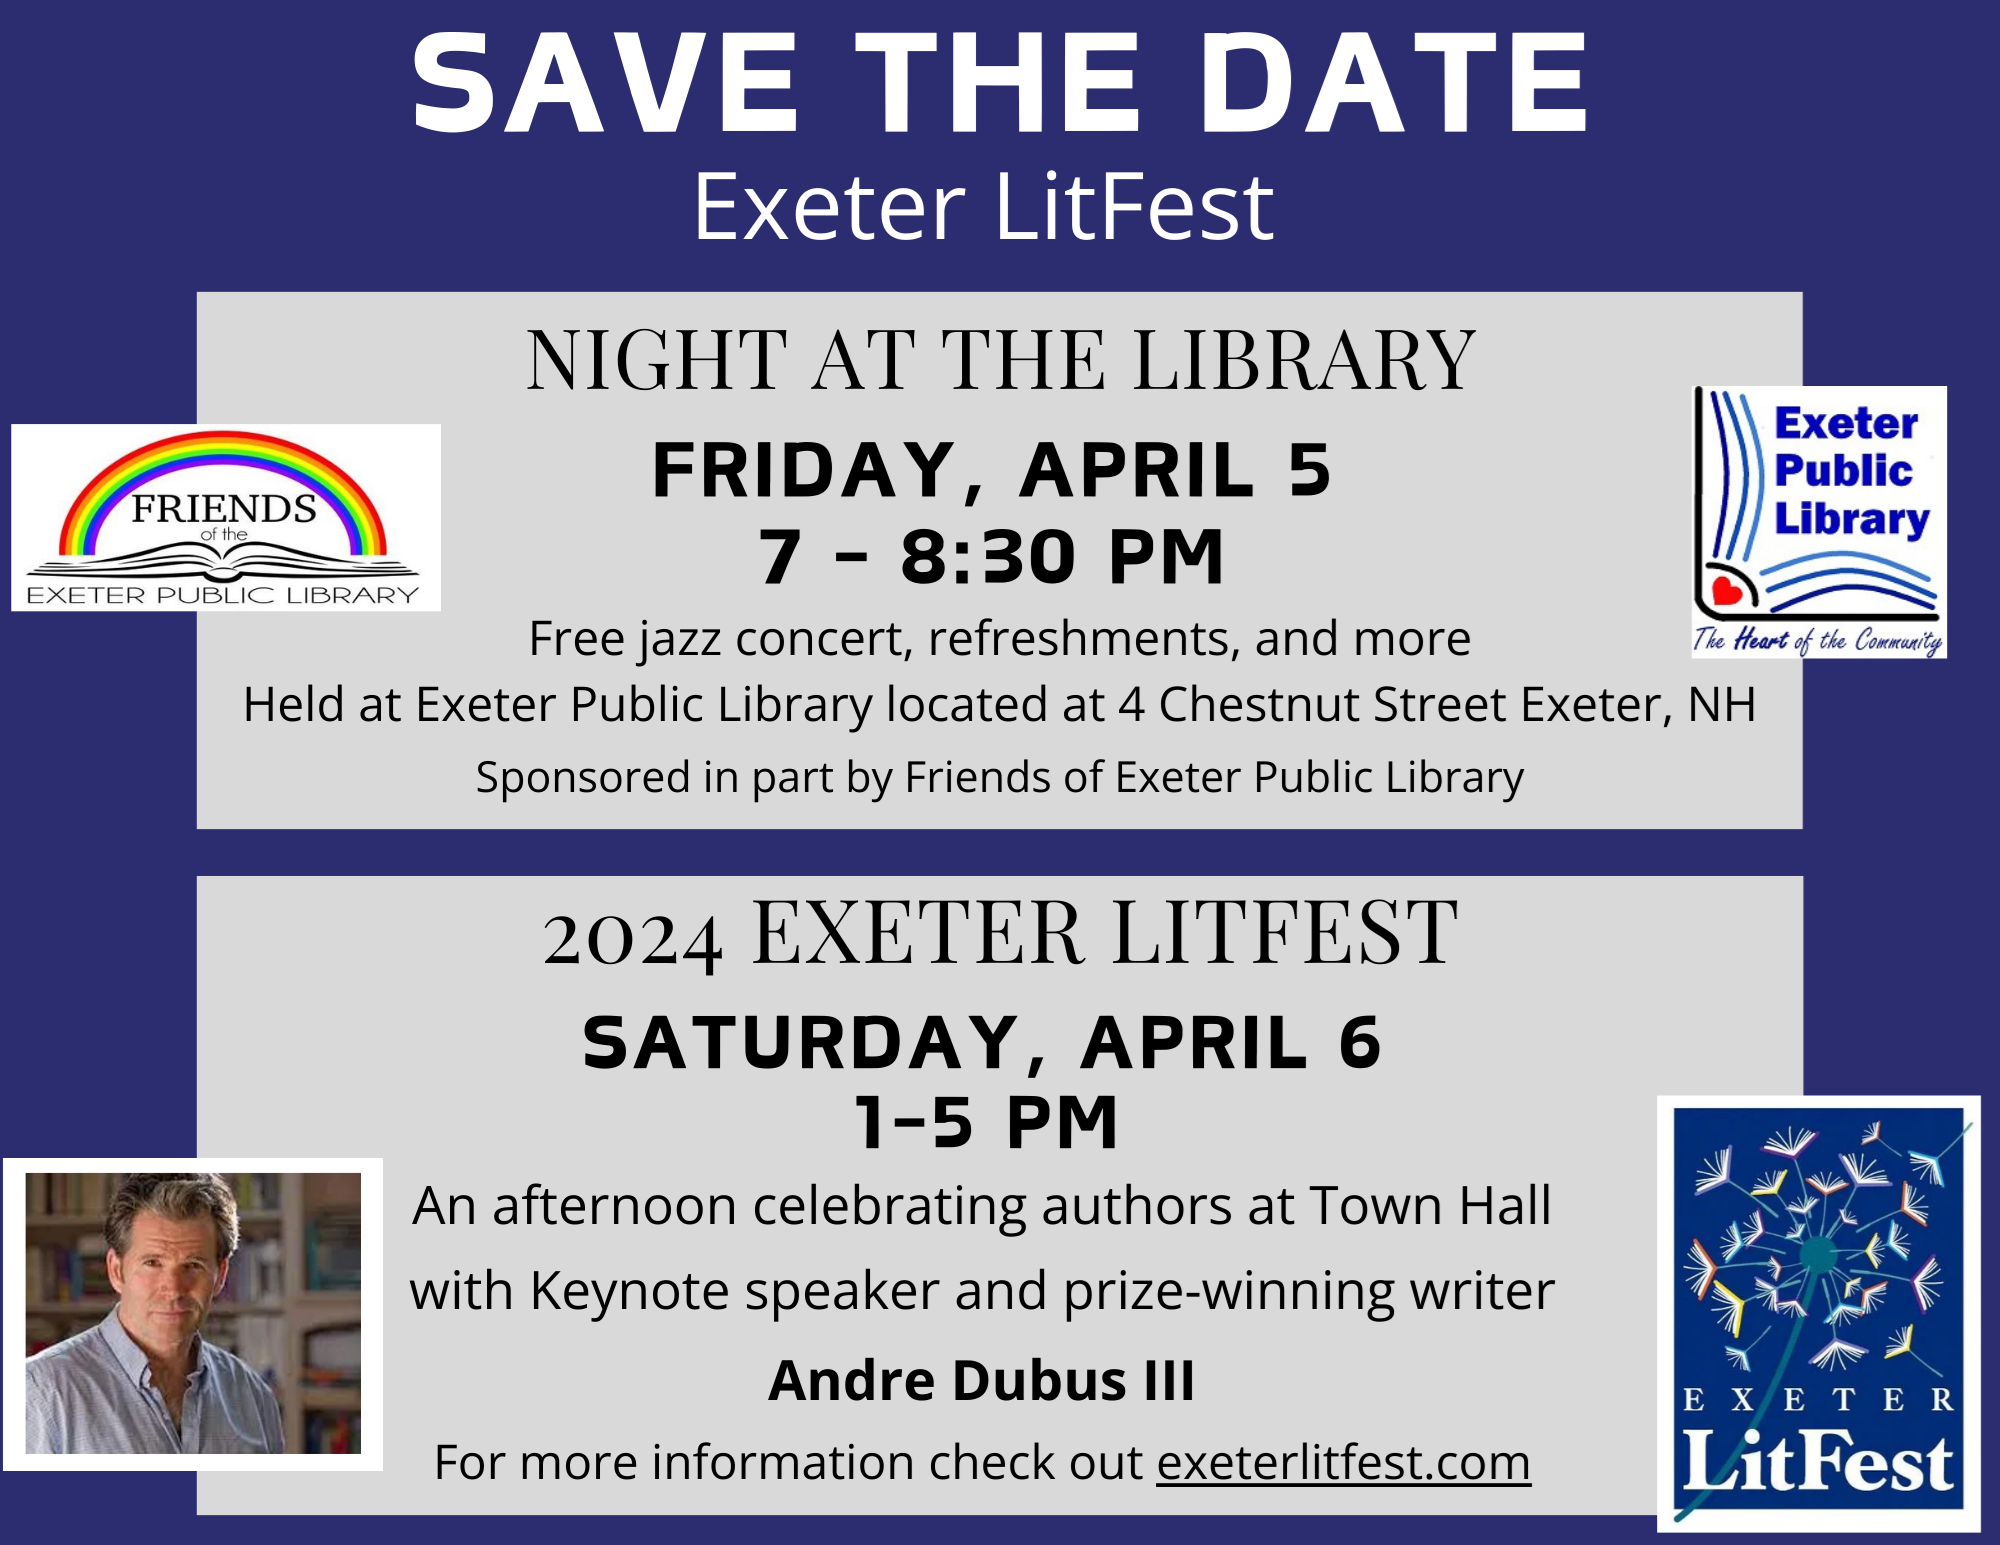 Exeter LitFest Night at the Library Friday, April 5 7 - 8:30 PM.